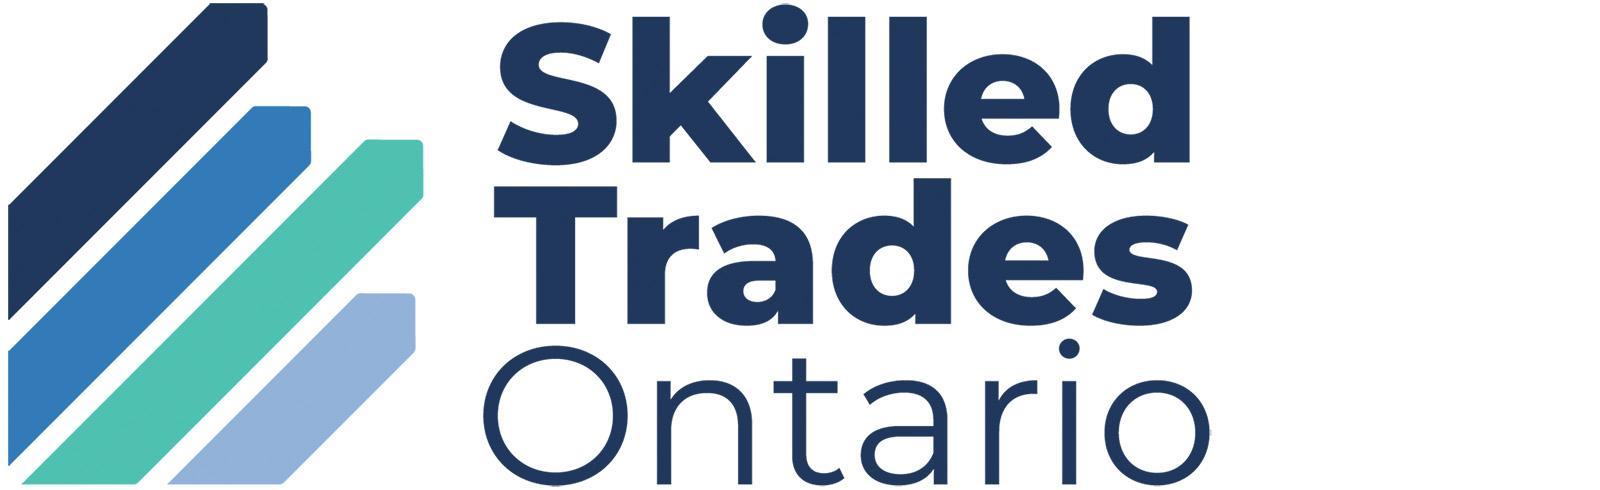 Skilled Trades Ontario to launch Certificates of Qualification, wallet cards for skilled trades professionals